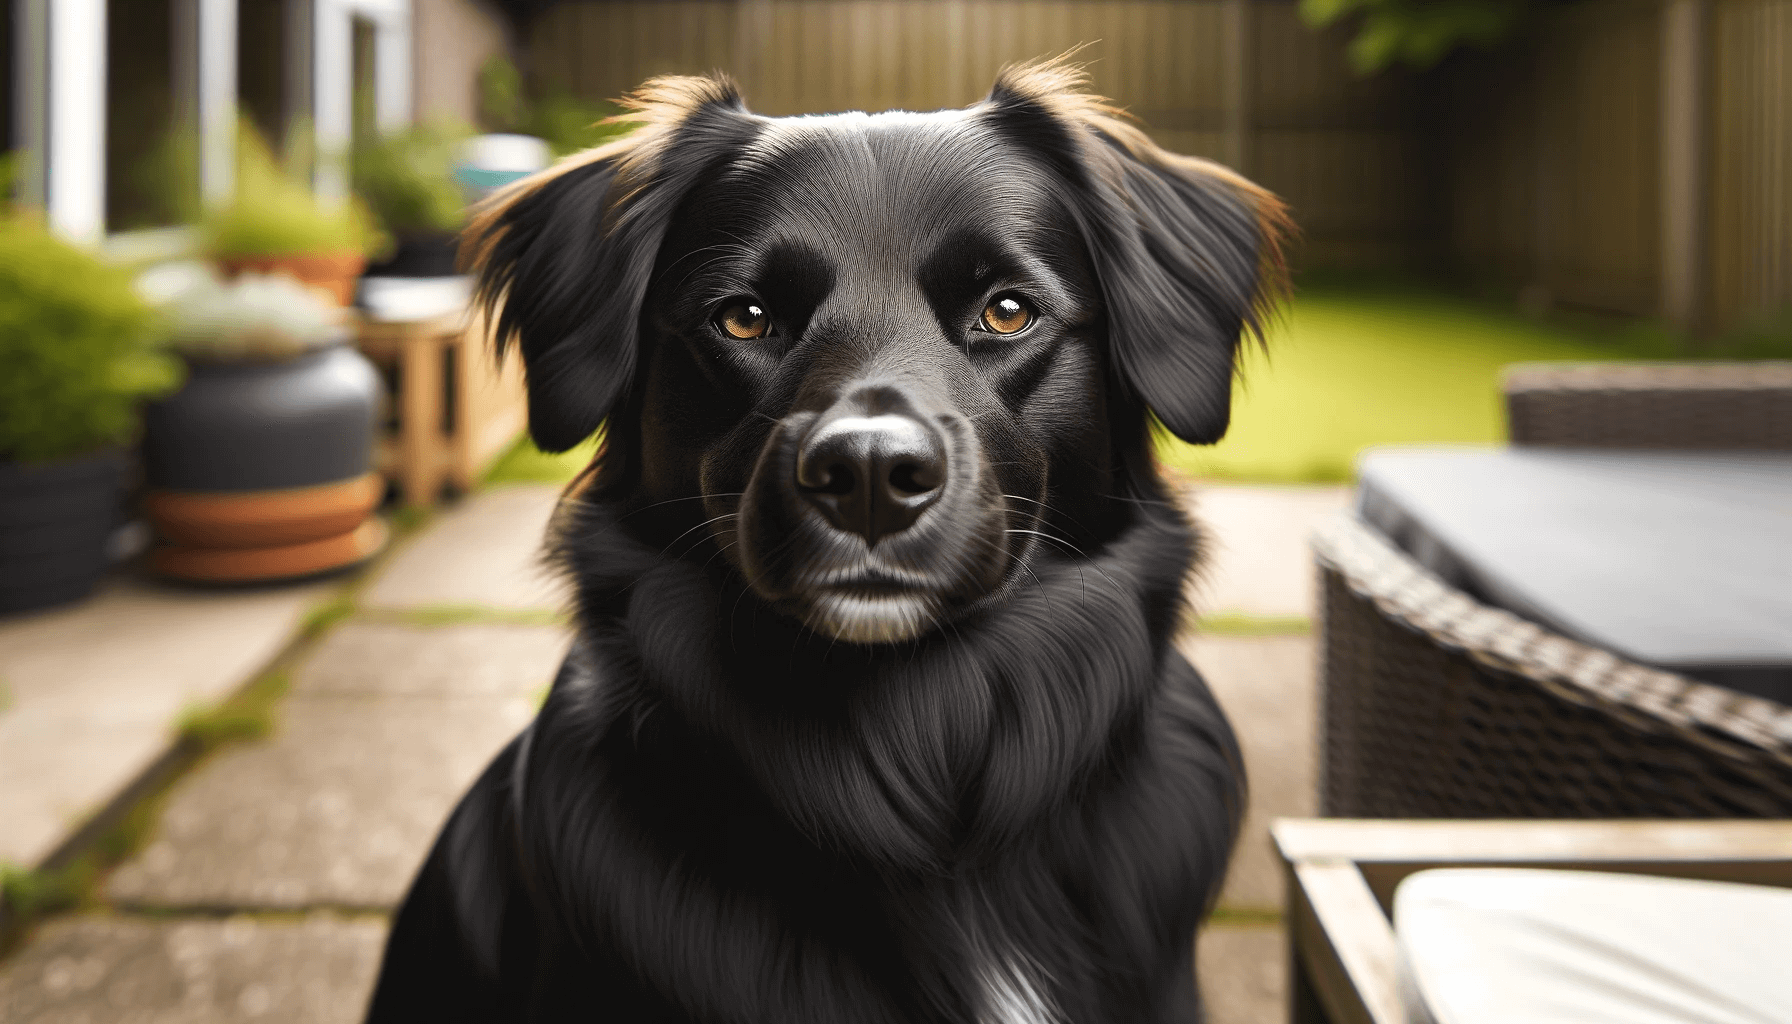 Handsome Borador Border Collie Lab Mix with a shiny black coat and a broad Lab-like face sitting outside with a relaxed and content expression.